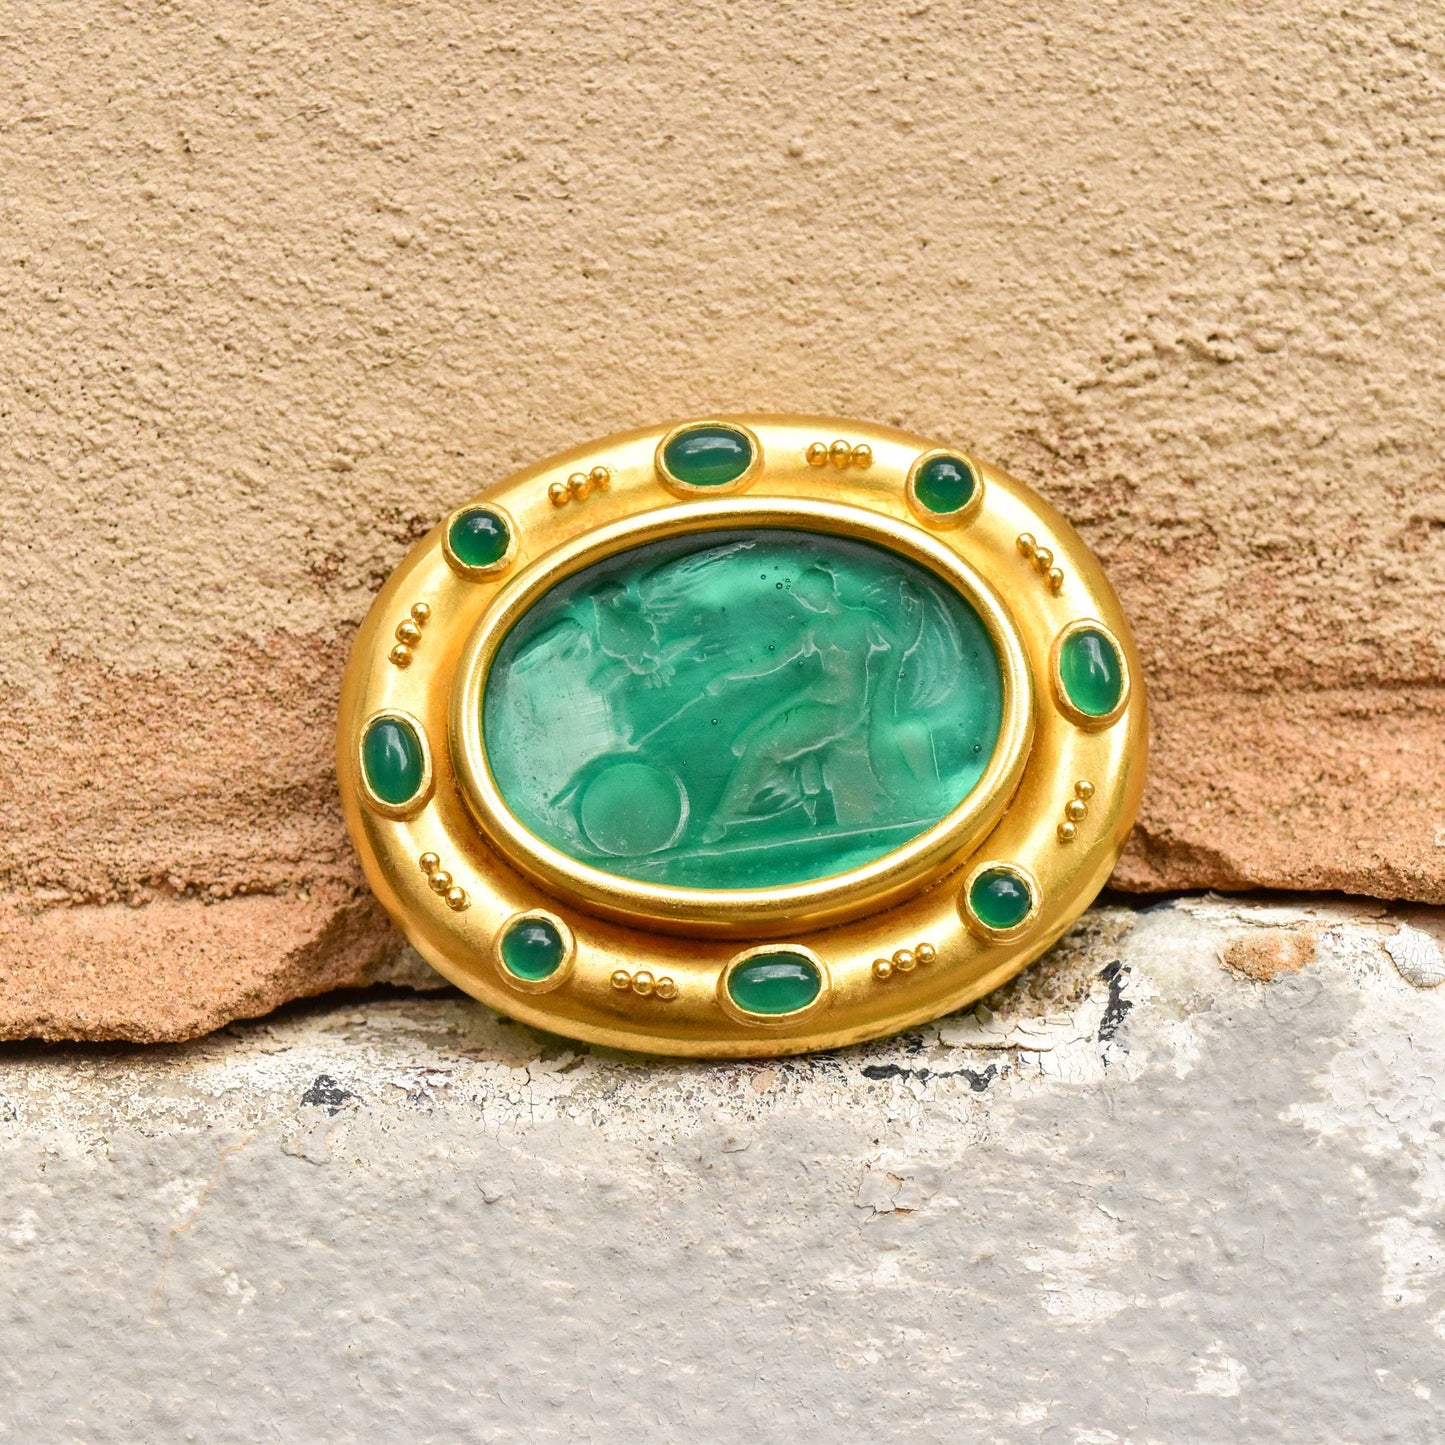 18K gold brooch pendant with oval green venetian glass intaglio center surrounded by emerald cabochons, textured gold rim, mother of pearl backing, 2 inches wide, by designer Elizabeth Locke